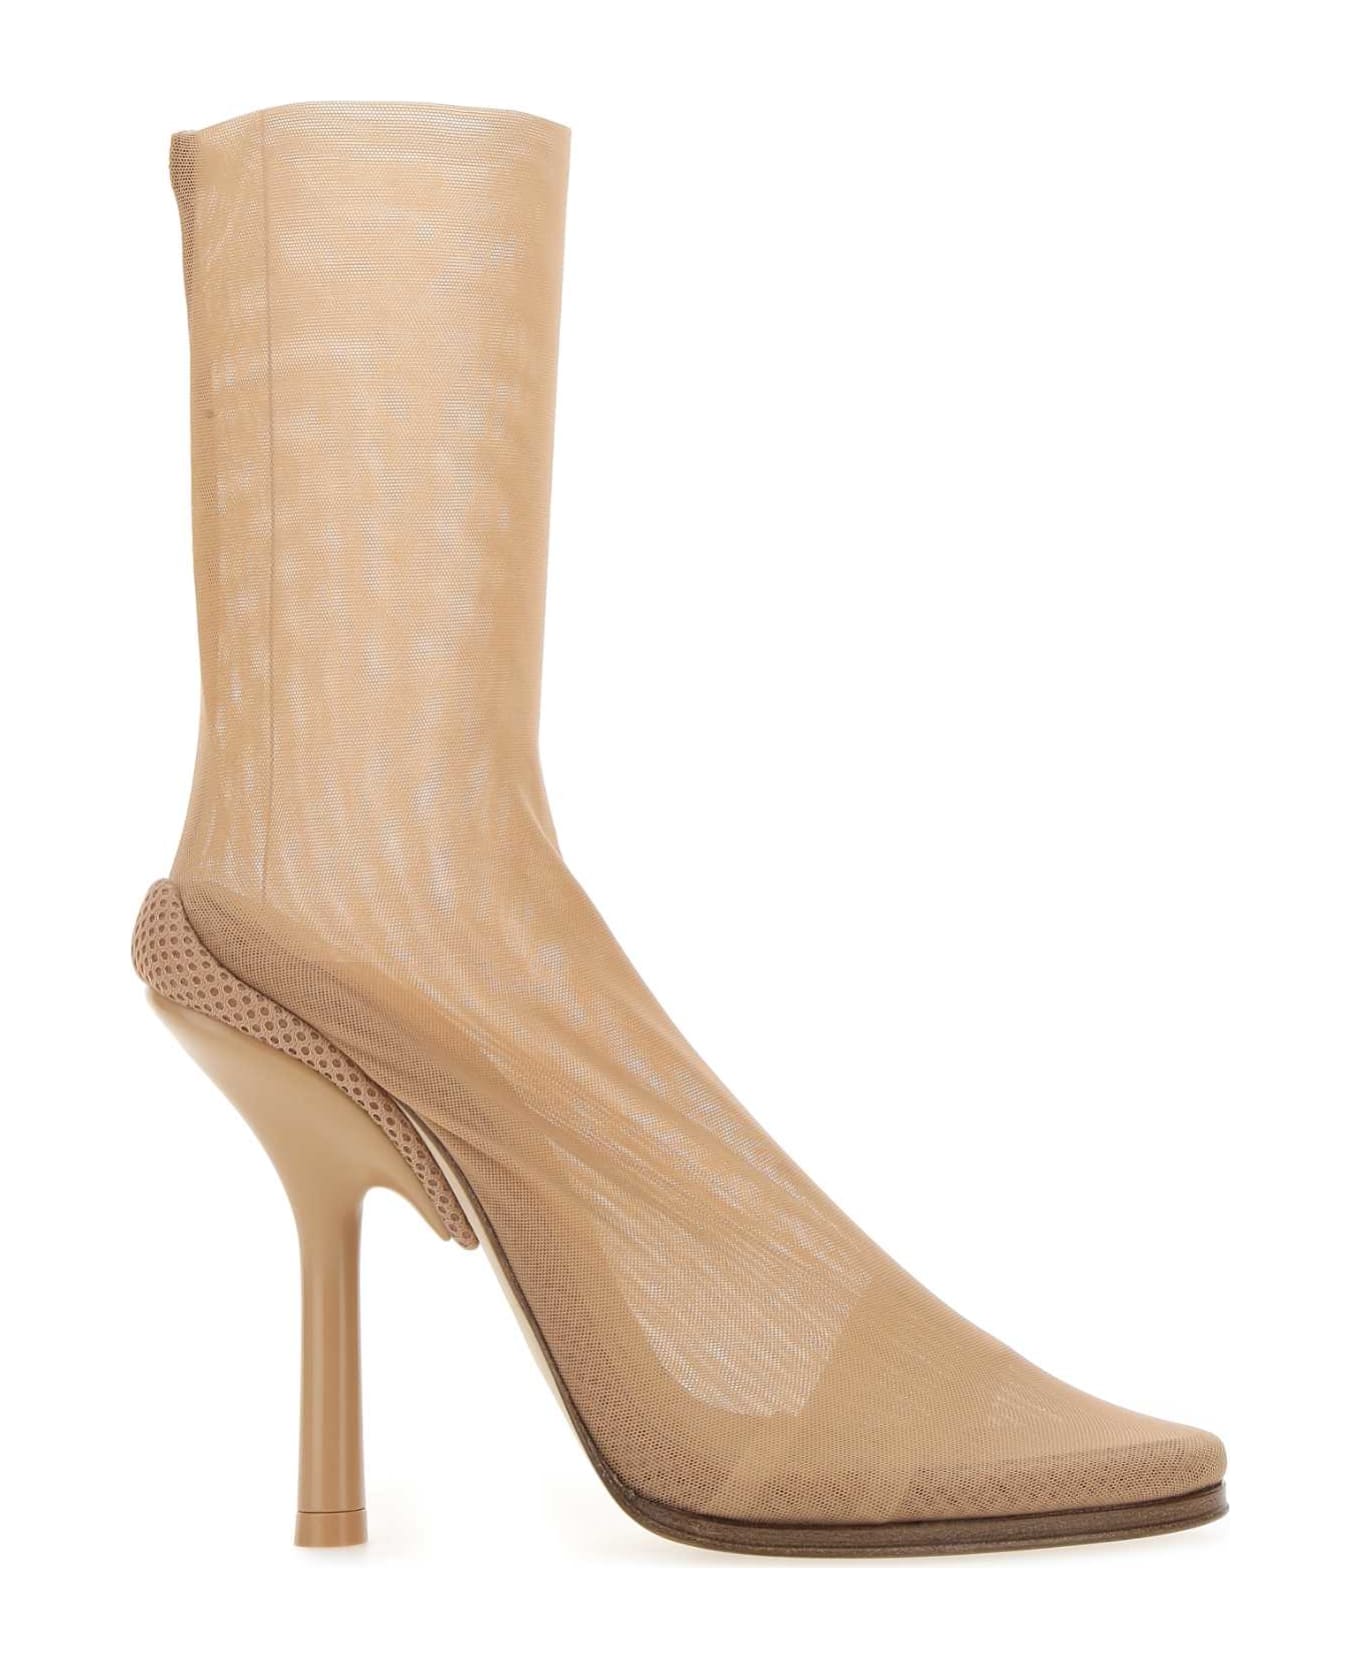 Burberry Beige Stretch Tulle Ankle Boots - A1435